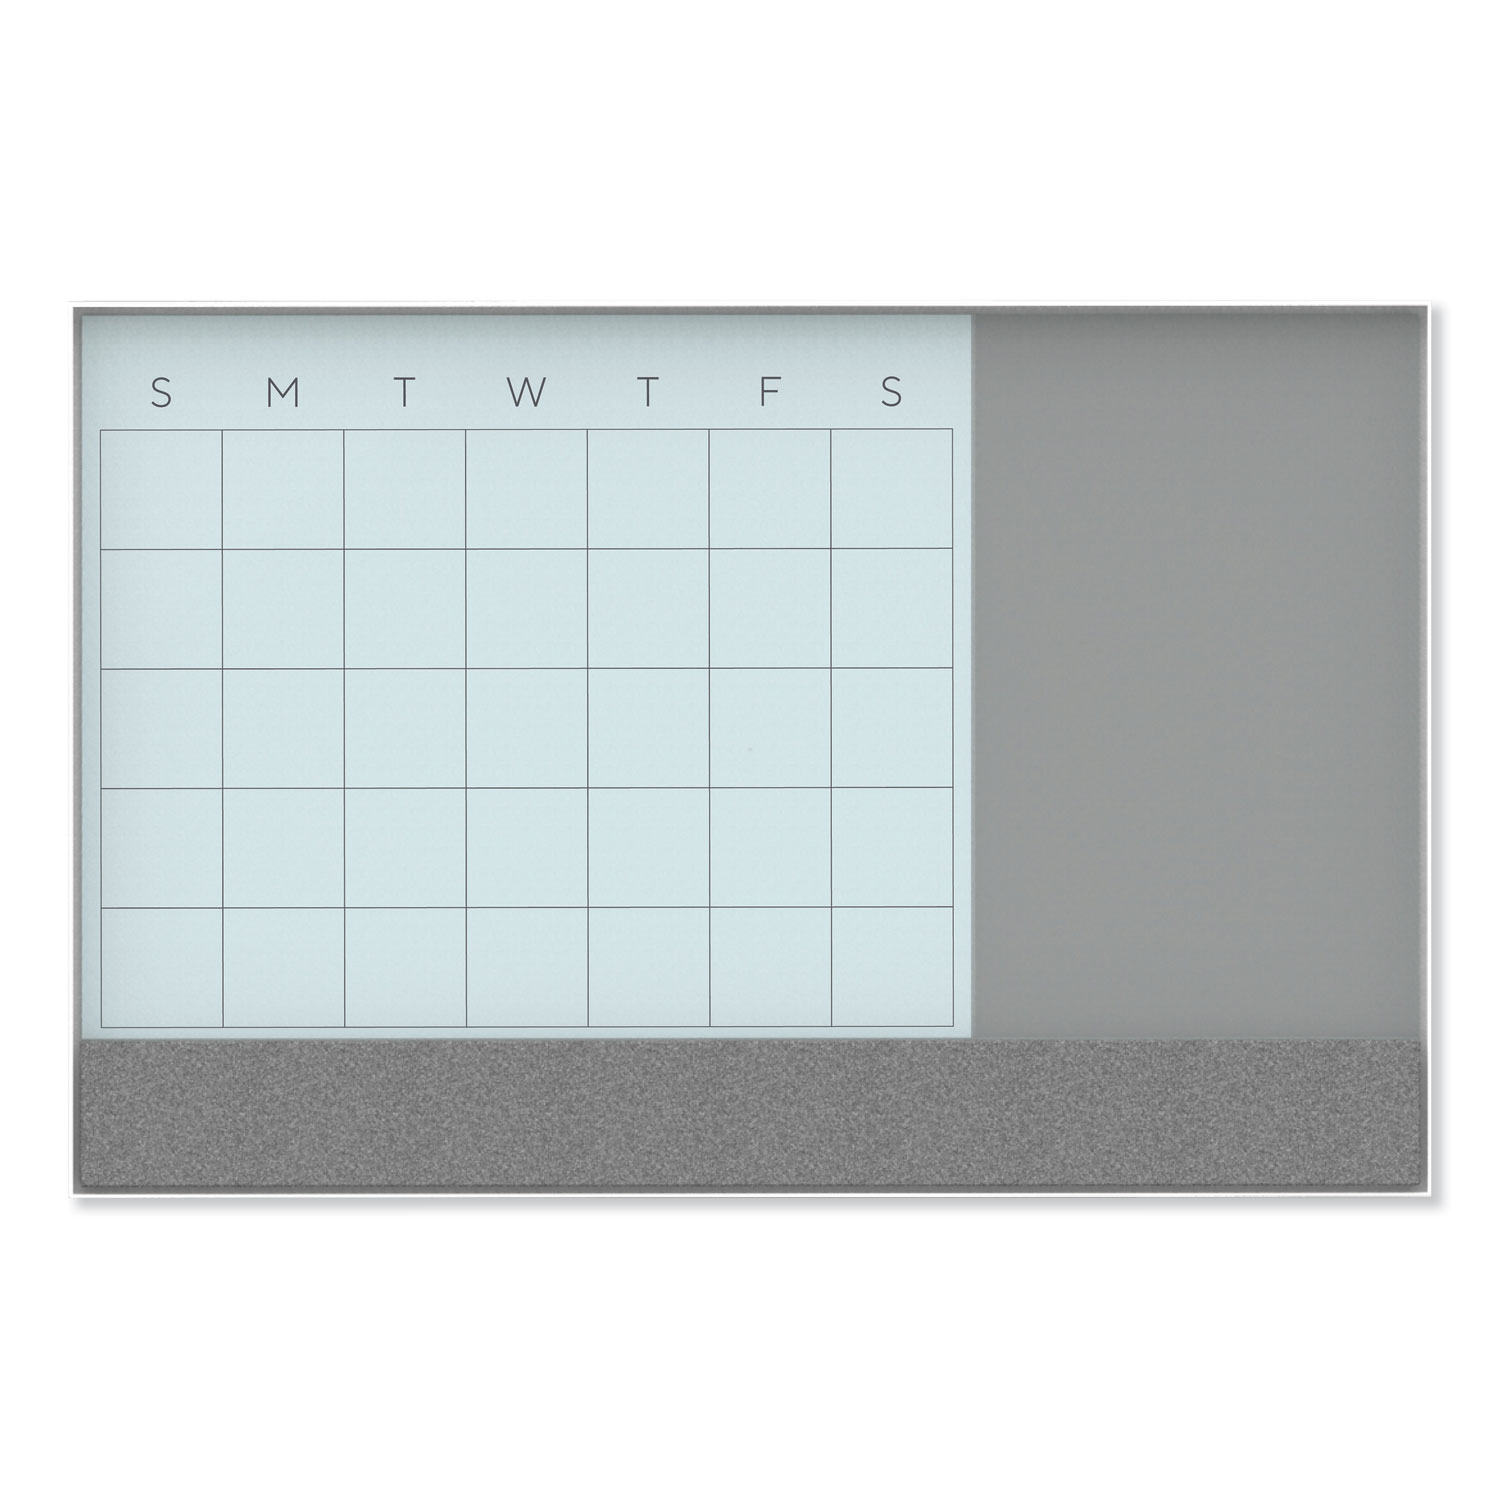  U Brands 3197U00-01 3N1 Magnetic Glass Dry Erase Combo Board, 36 x 24, Month View, White Surface and Frame (UBR3197U0001) 